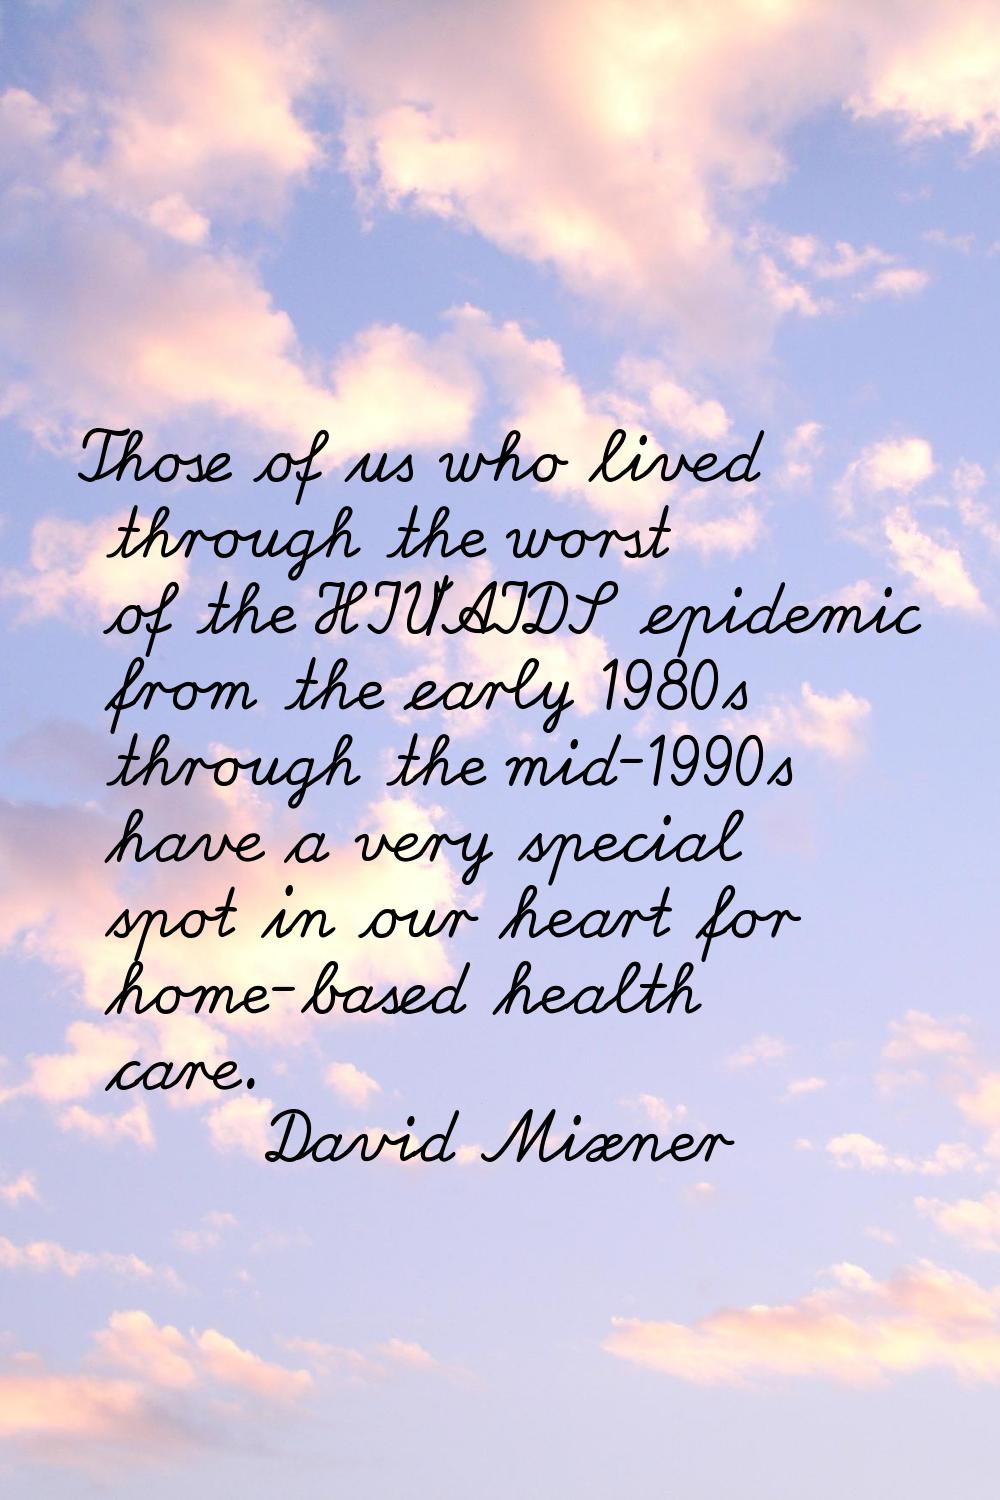 Those of us who lived through the worst of the HIV/AIDS epidemic from the early 1980s through the m